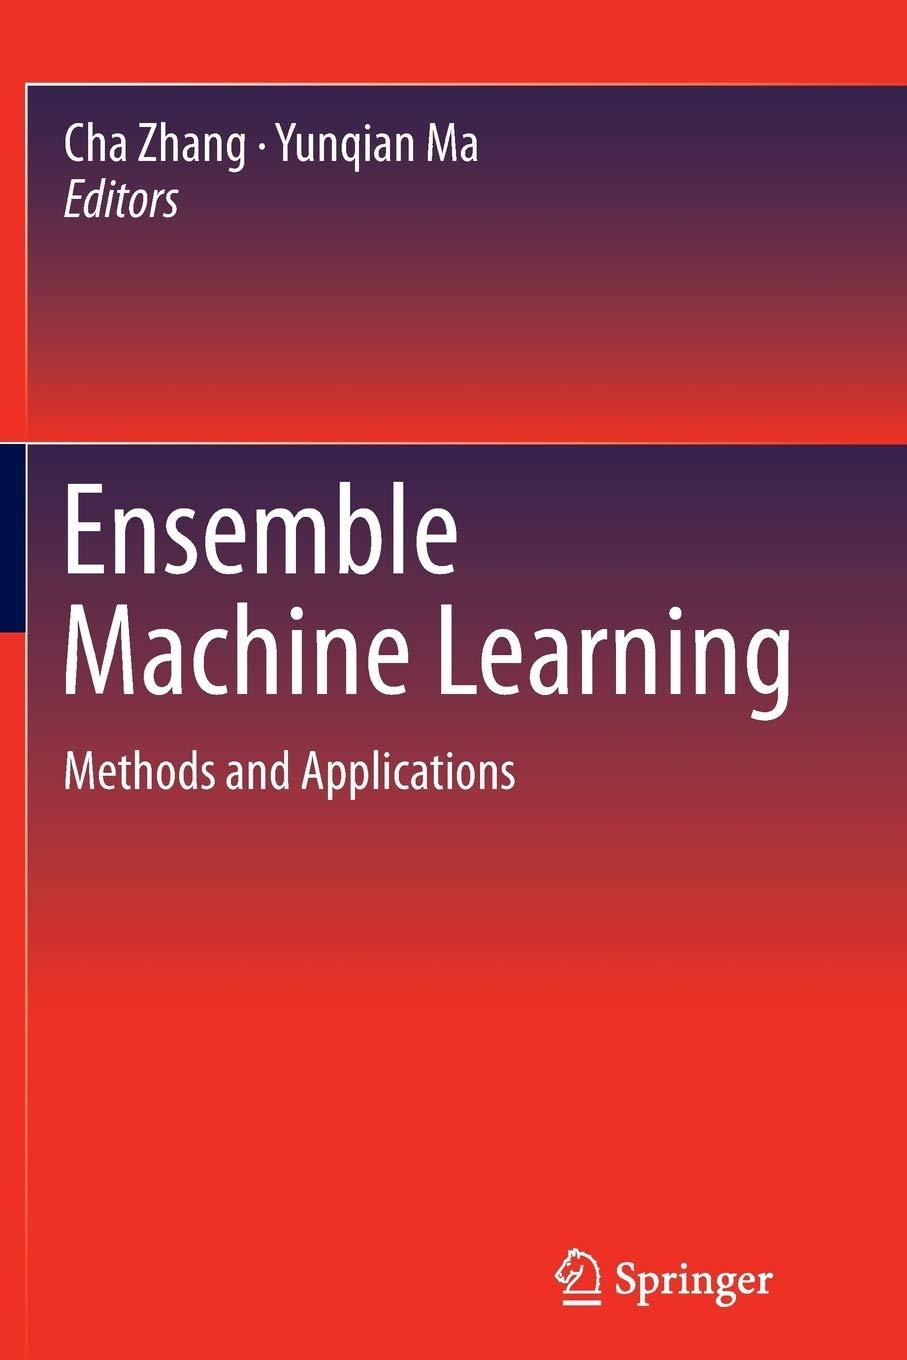 ensemble machine learning  methods and applications 1st edition cha zhang , yunqian ma 1489988173,